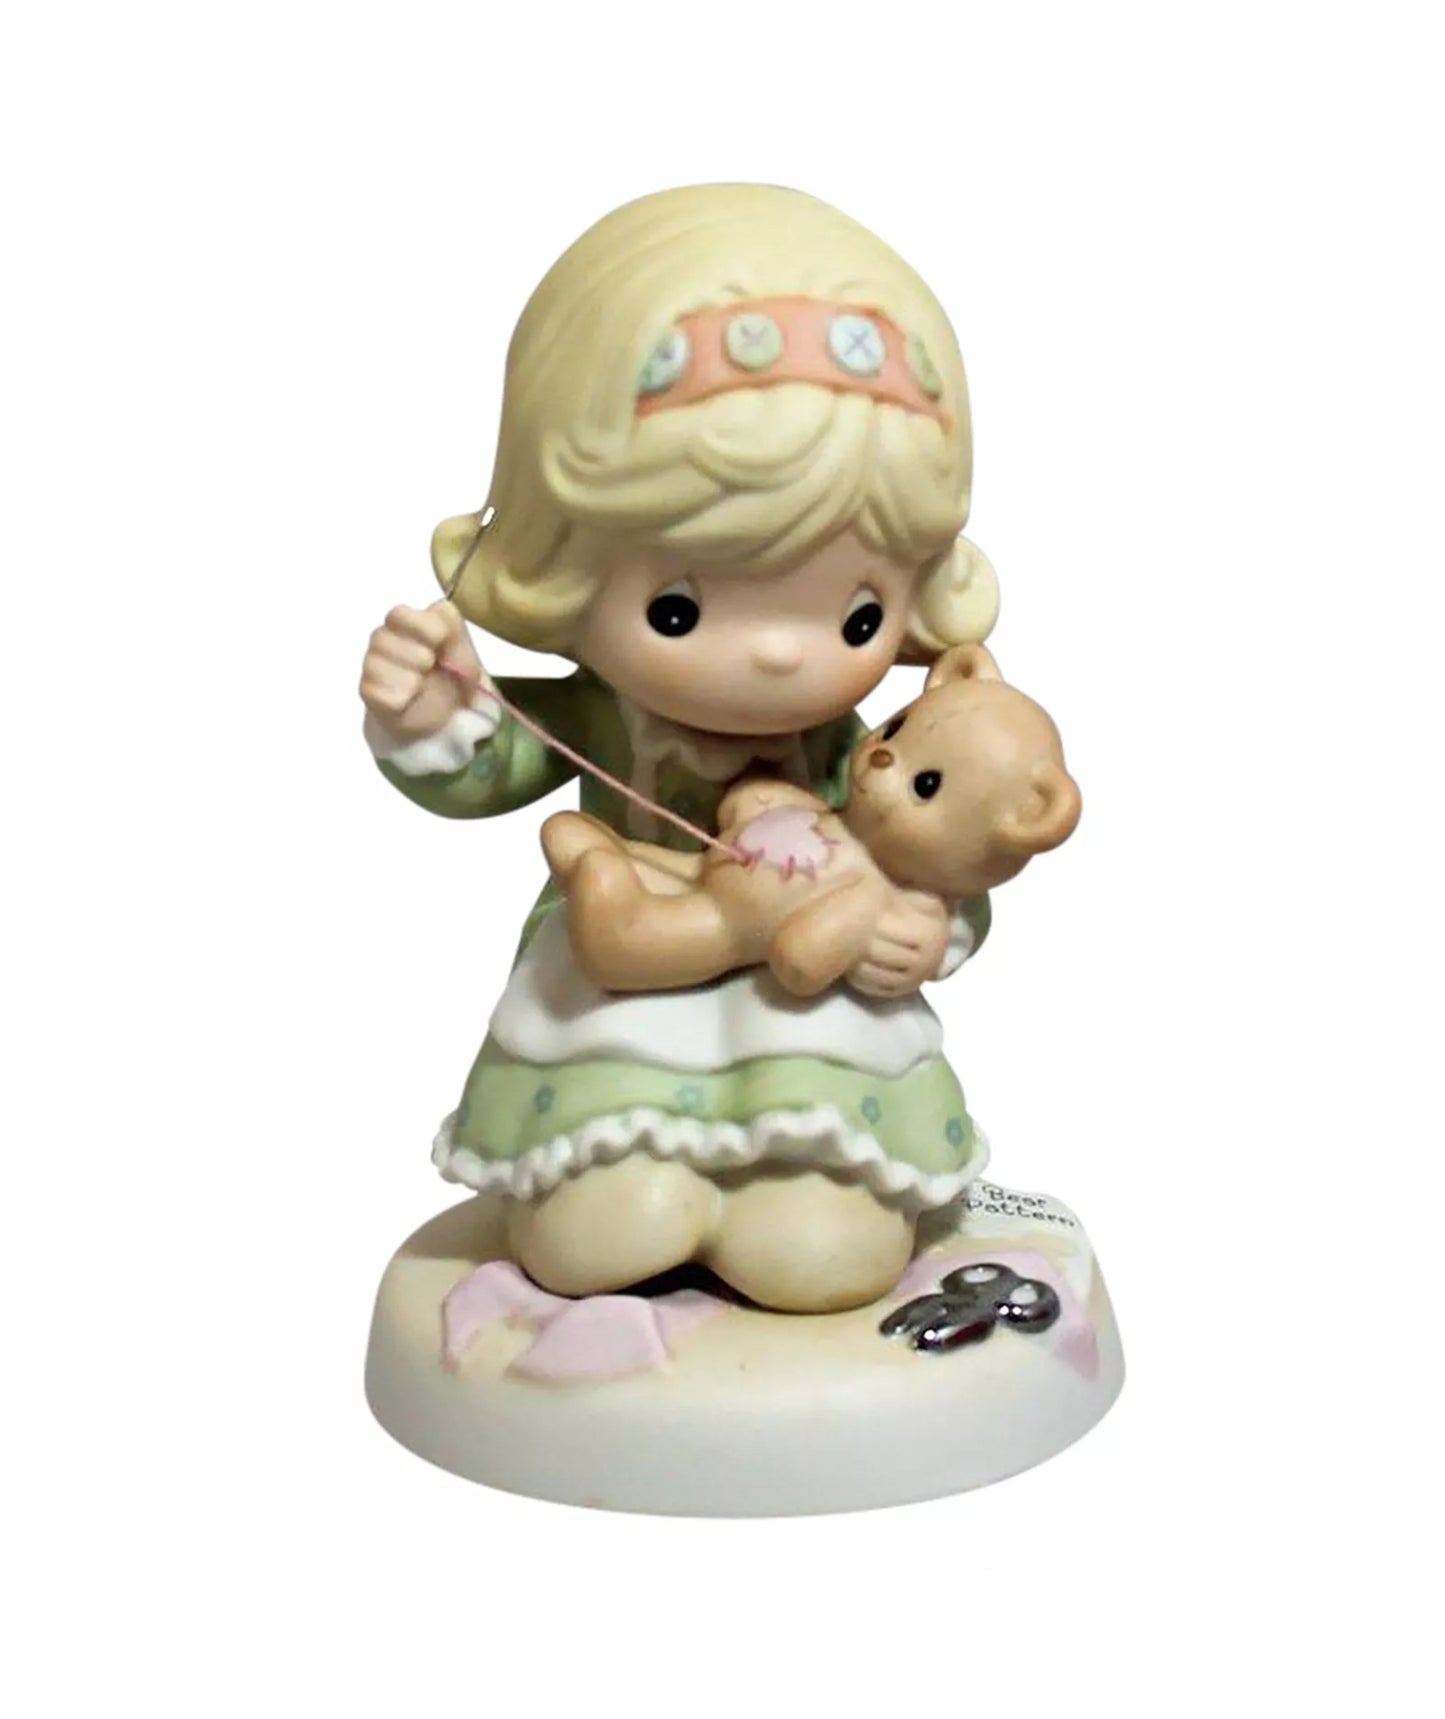 You Have The Beary Best Heart - Precious Moment Figurine